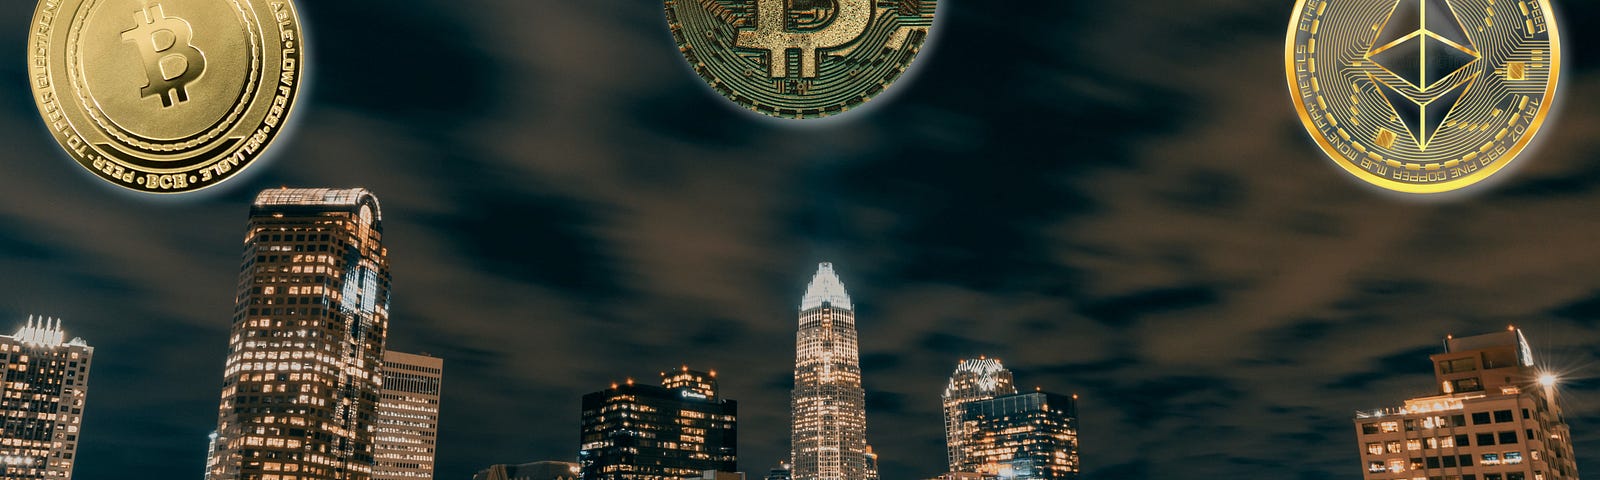 Skyscrapers and city buildings during the night with logos of cryptocurrencies at the top of the image.